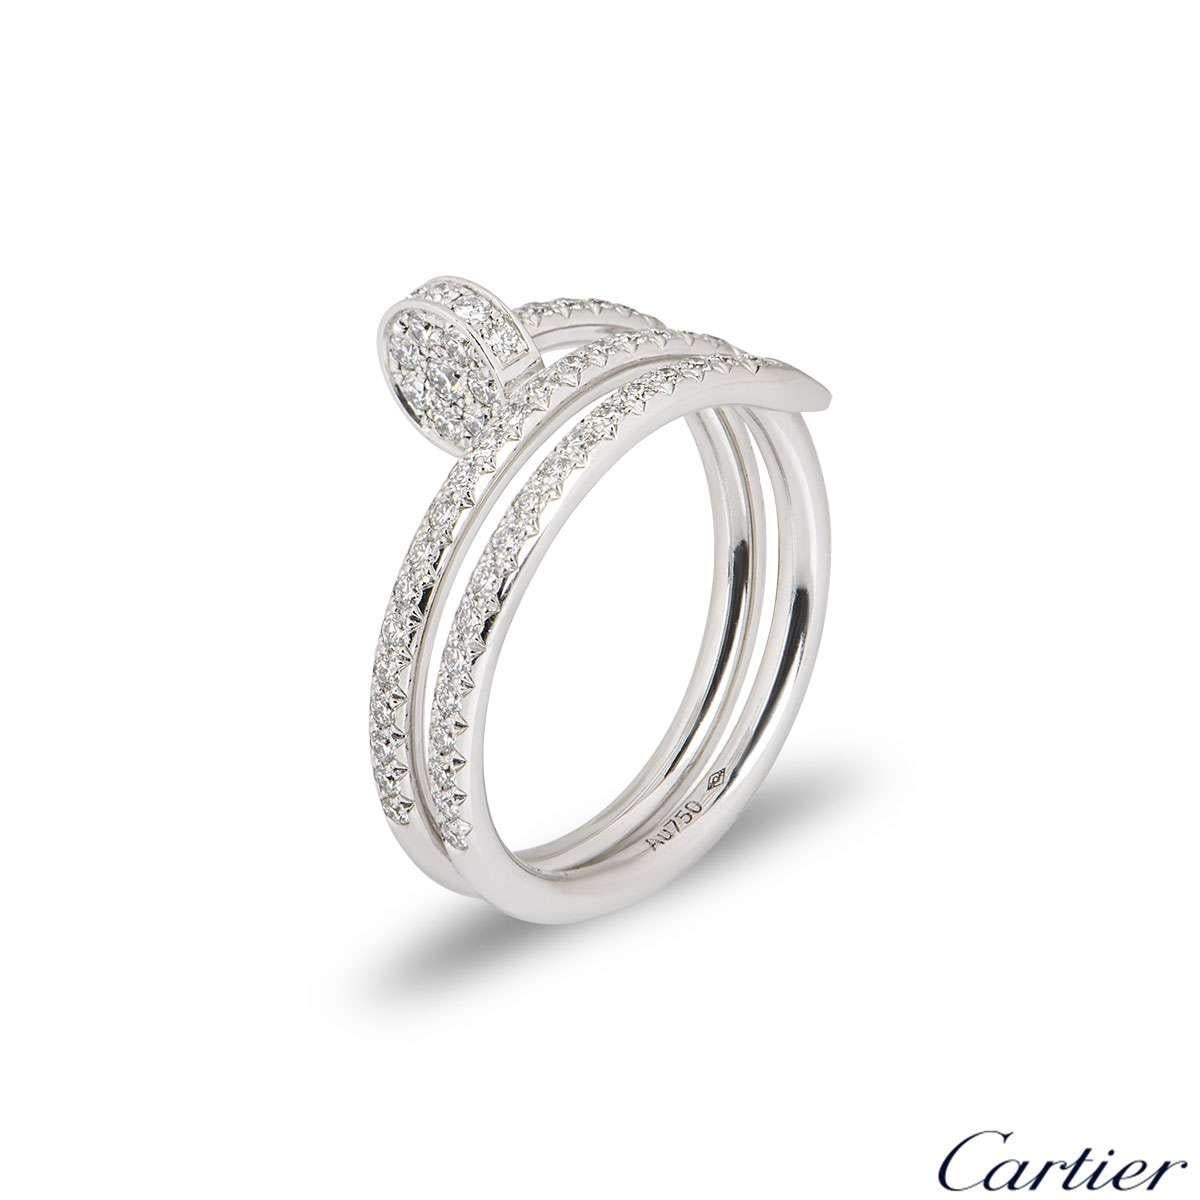 An 18k white gold double Juste Un Clou ring by Cartier. The ring is in the style of a nail wrapping around the finger, set with round brilliant cut diamonds to the front sections. There are 77 diamonds with a total diamond weight of 0.59ct. The ring